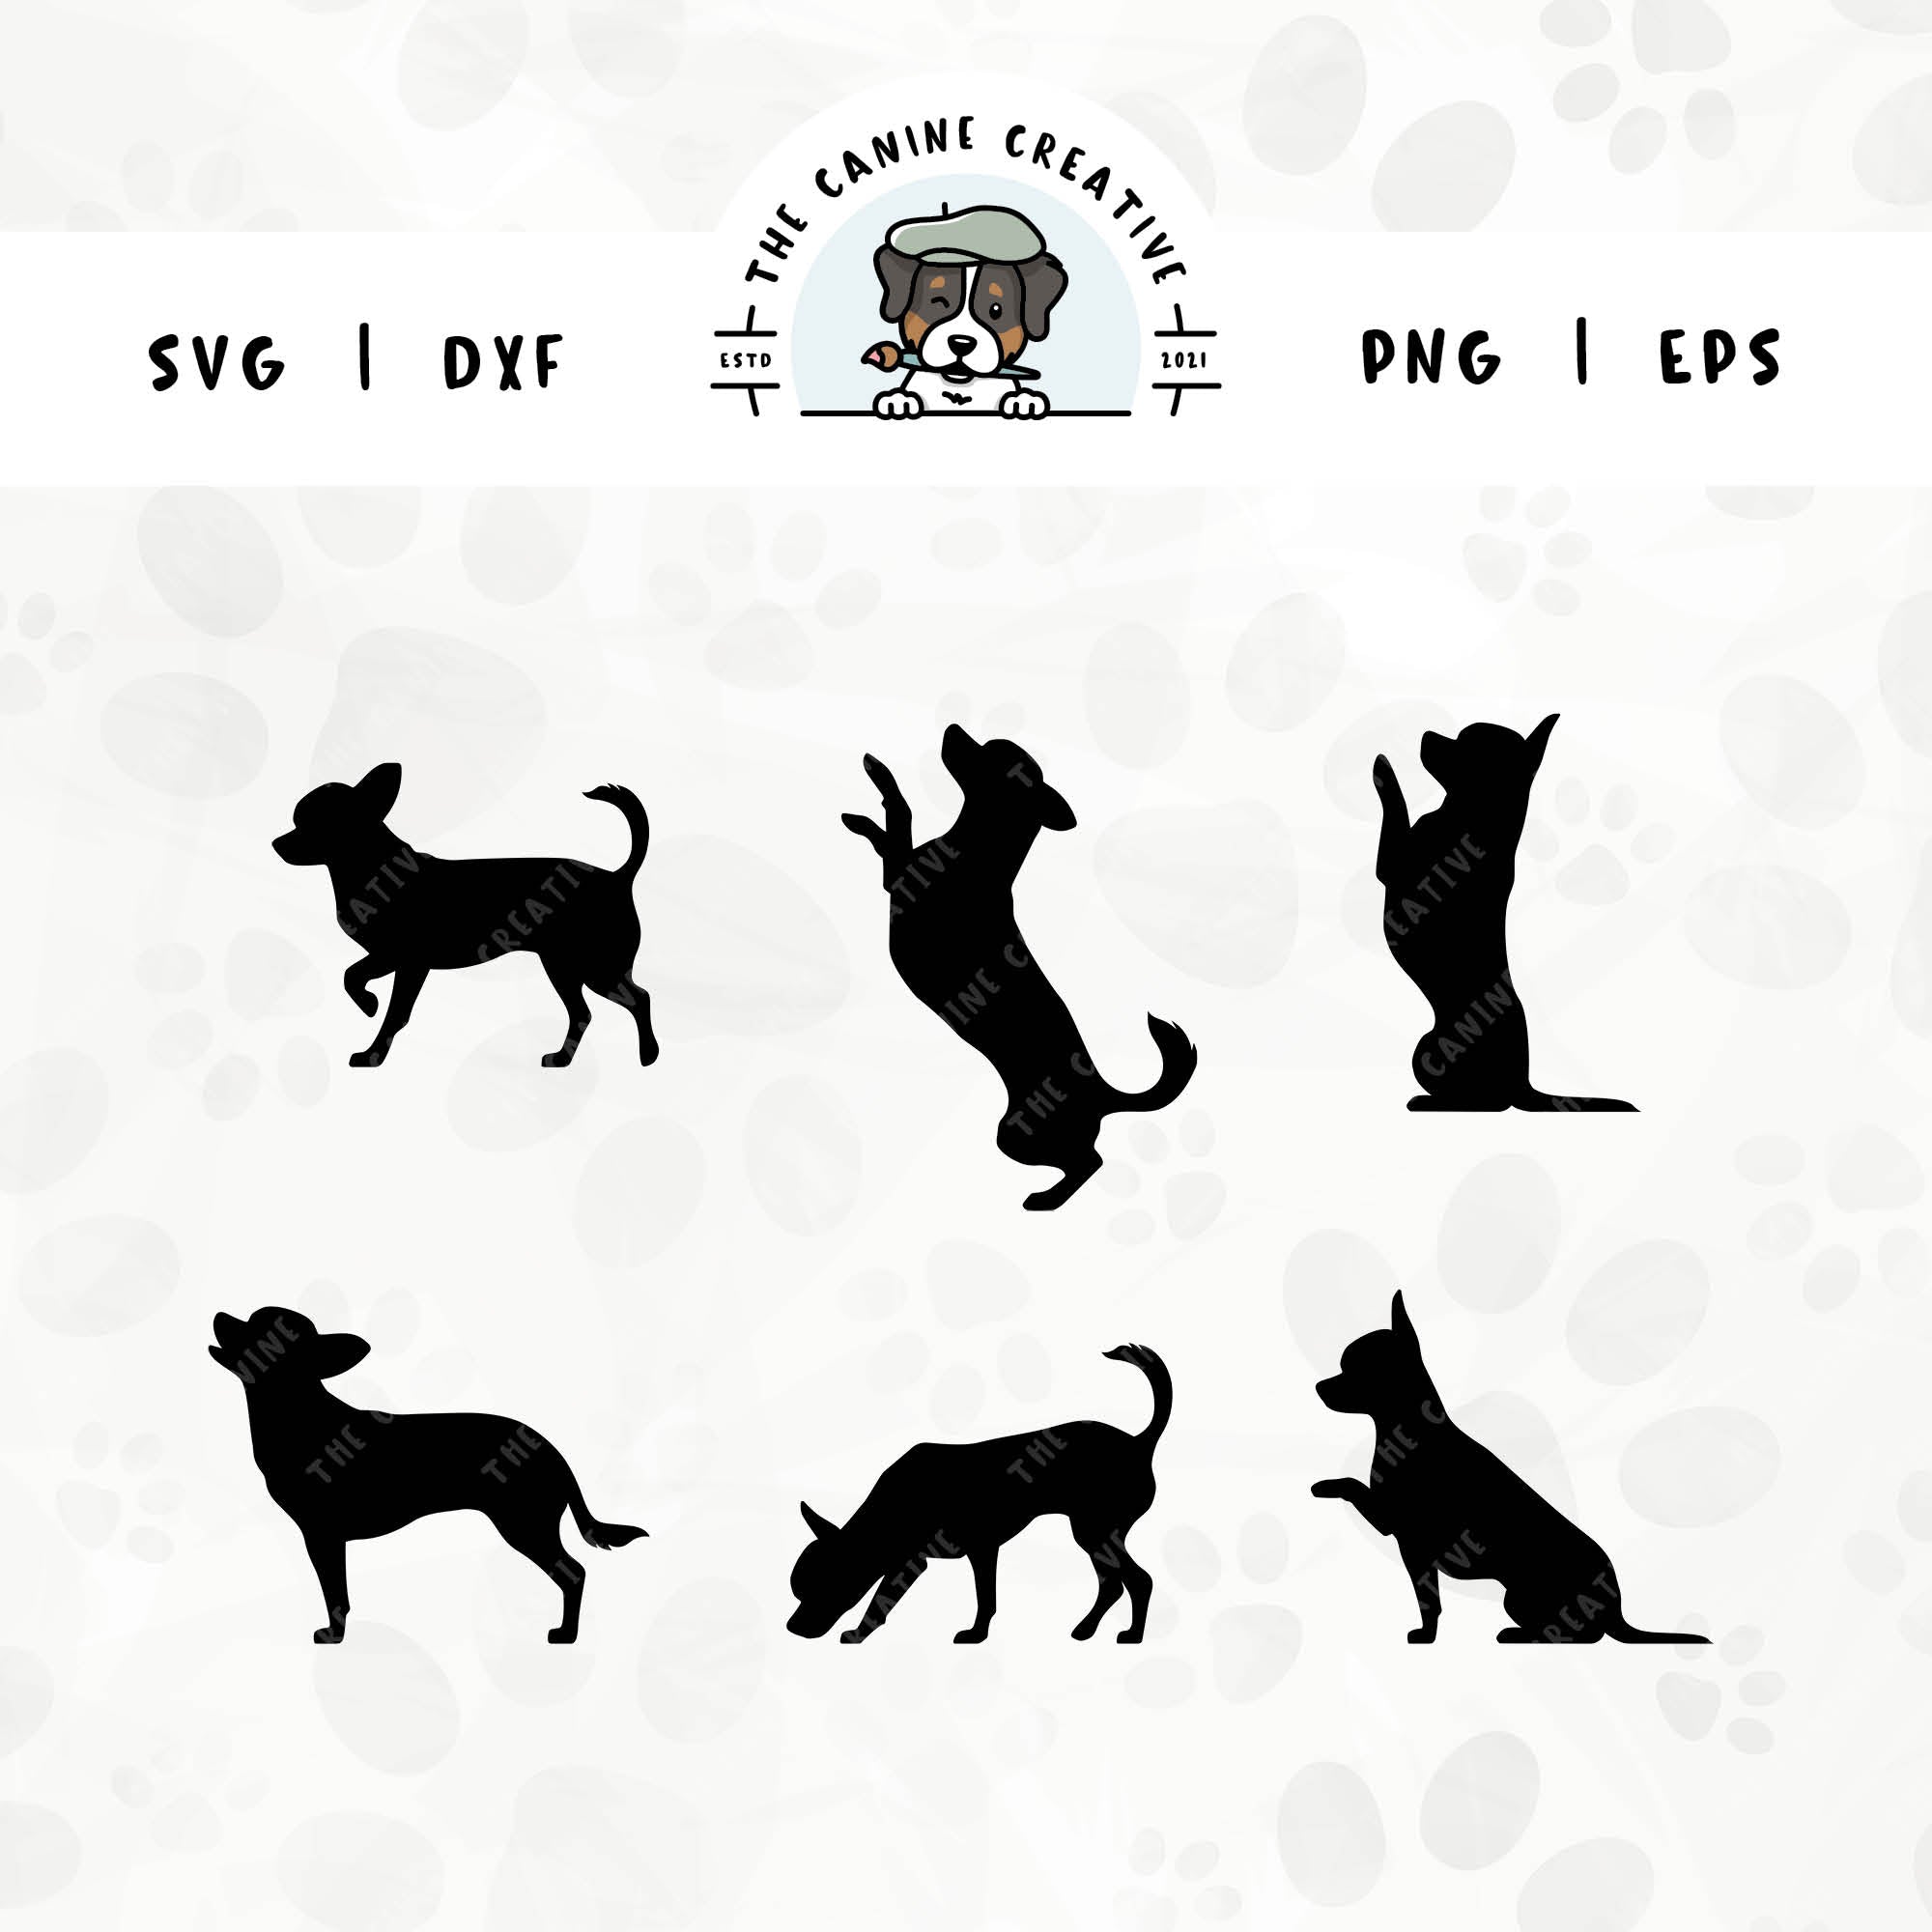 This 6-pack Smooth Coat Chihuahua silhouette bundle (set 2) features various dog poses including walking, jumping up, begging, barking, sniffing, and shaking a paw. File formats include: SVG, DXF, PNG, and EPS.